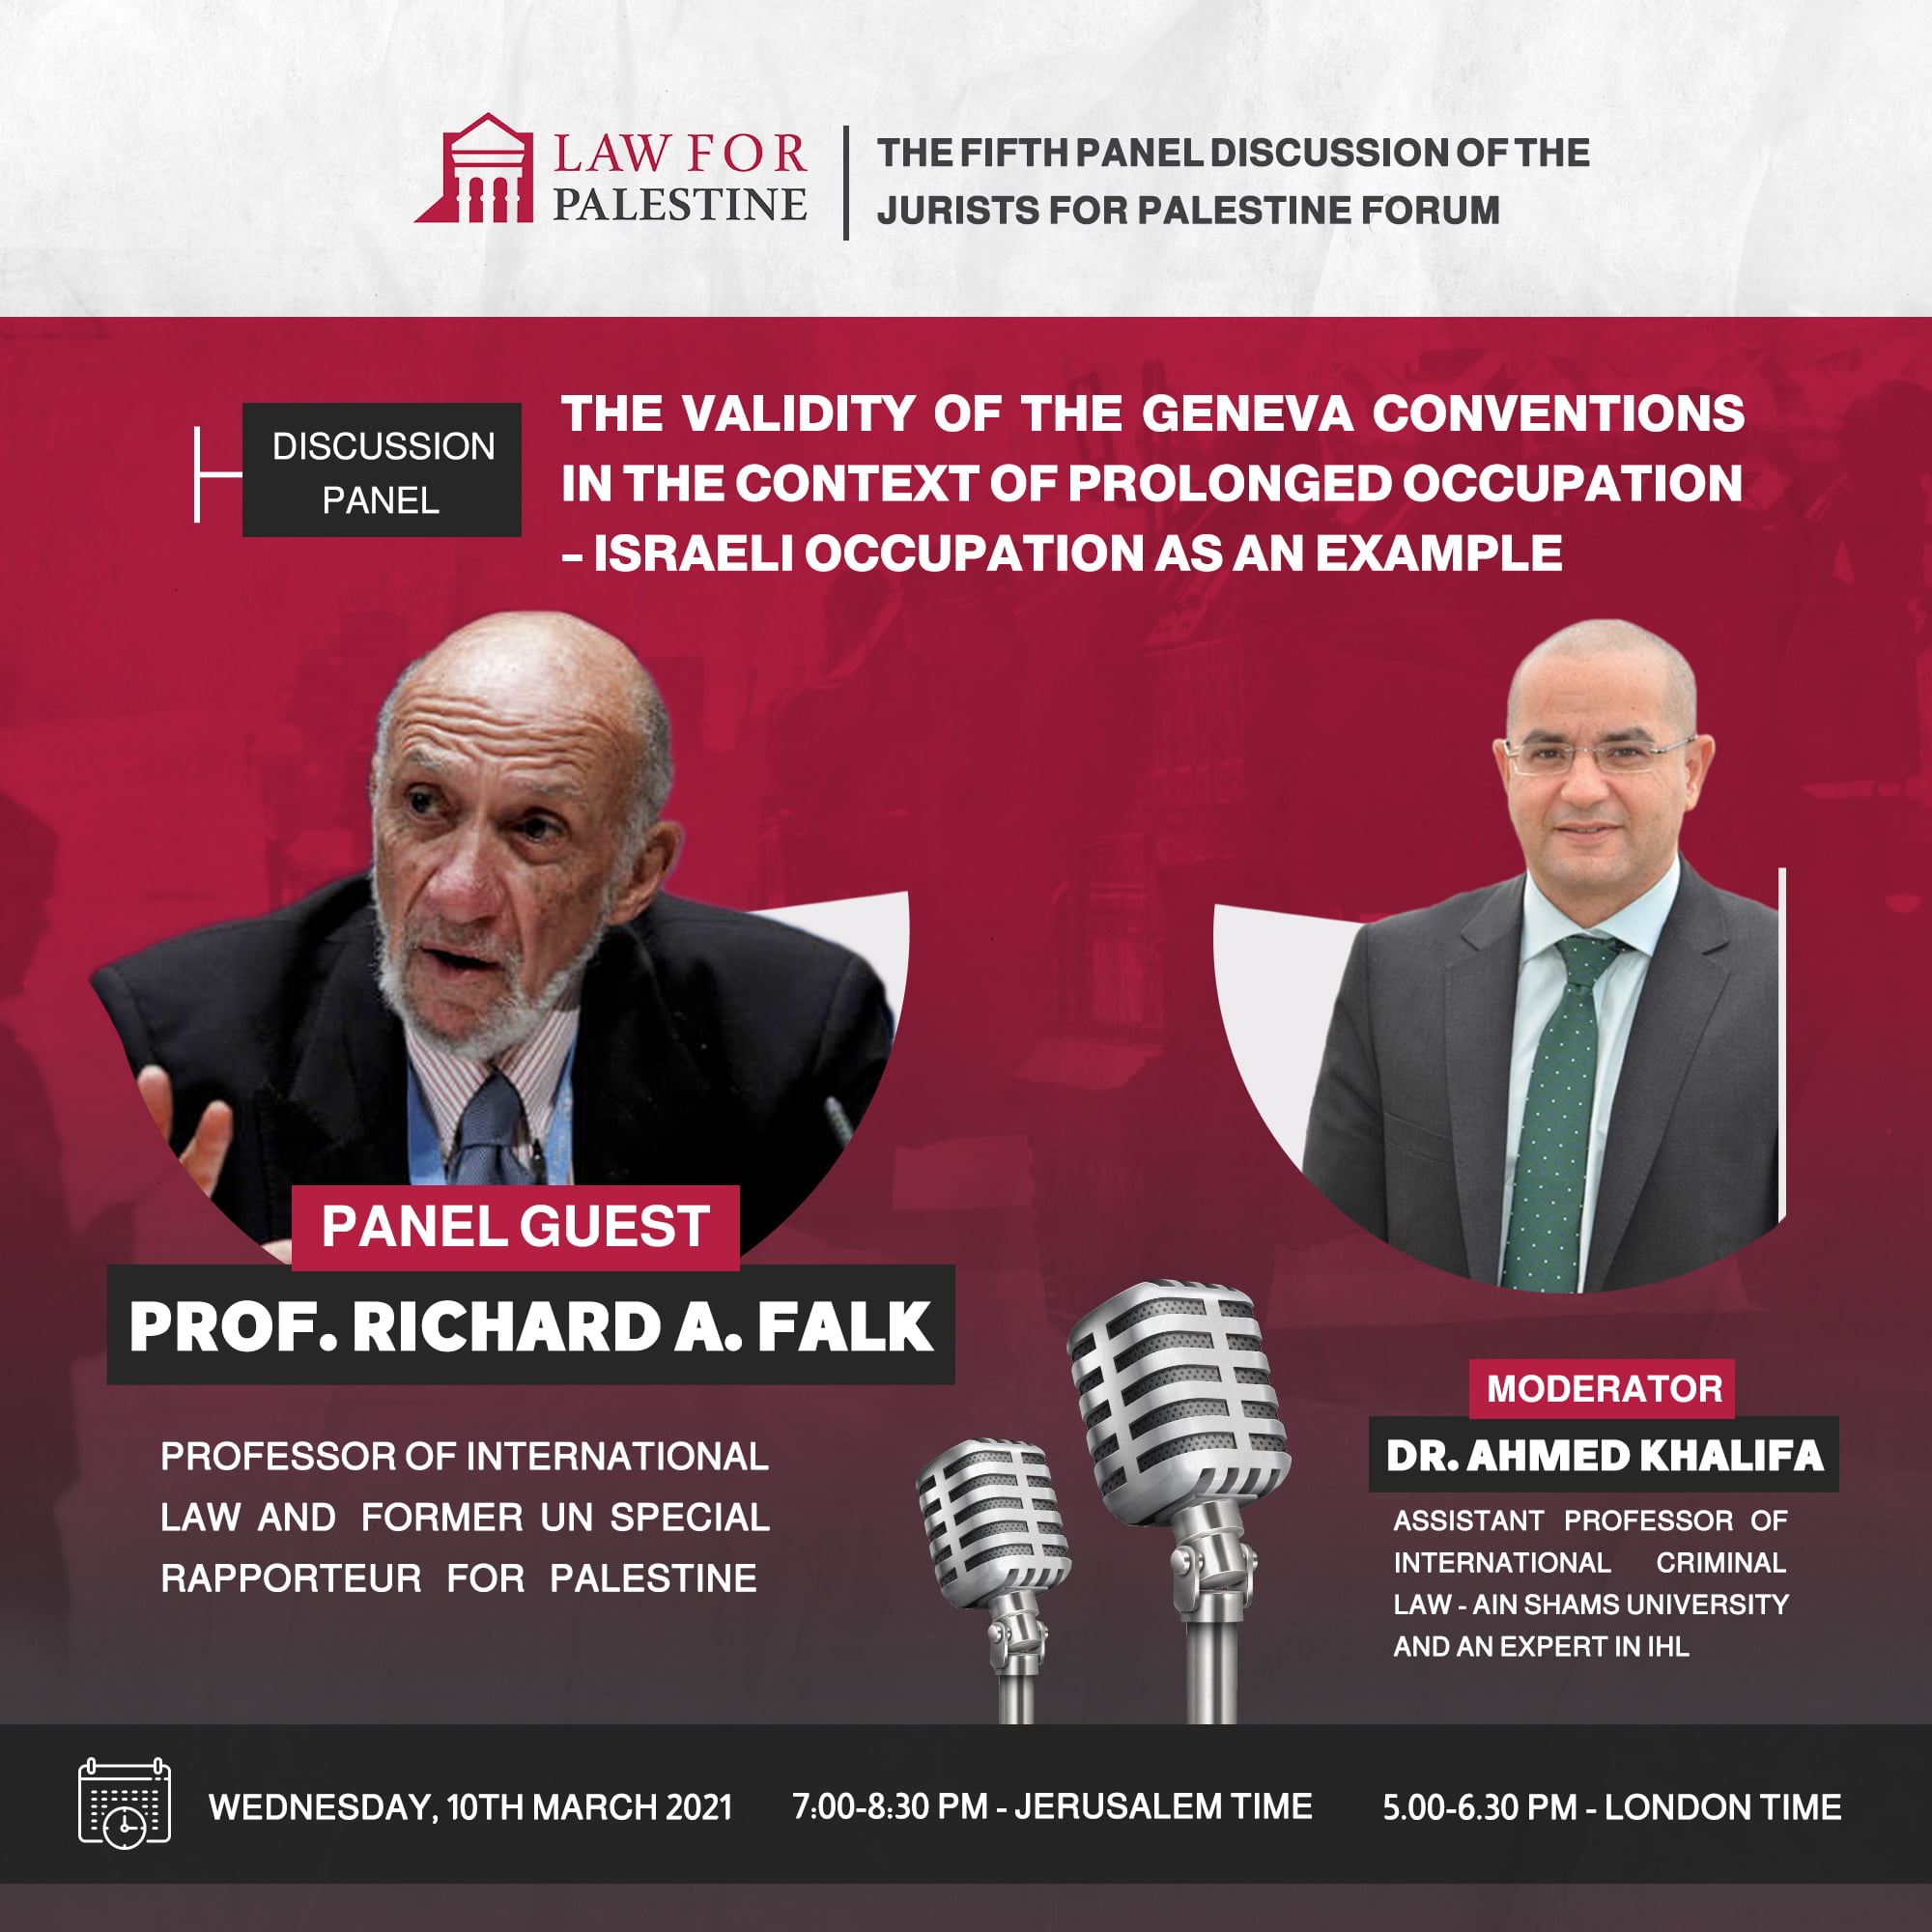 Richard Falk: The Validity of the Geneva Conventions in the Context of Prolonged Occupation